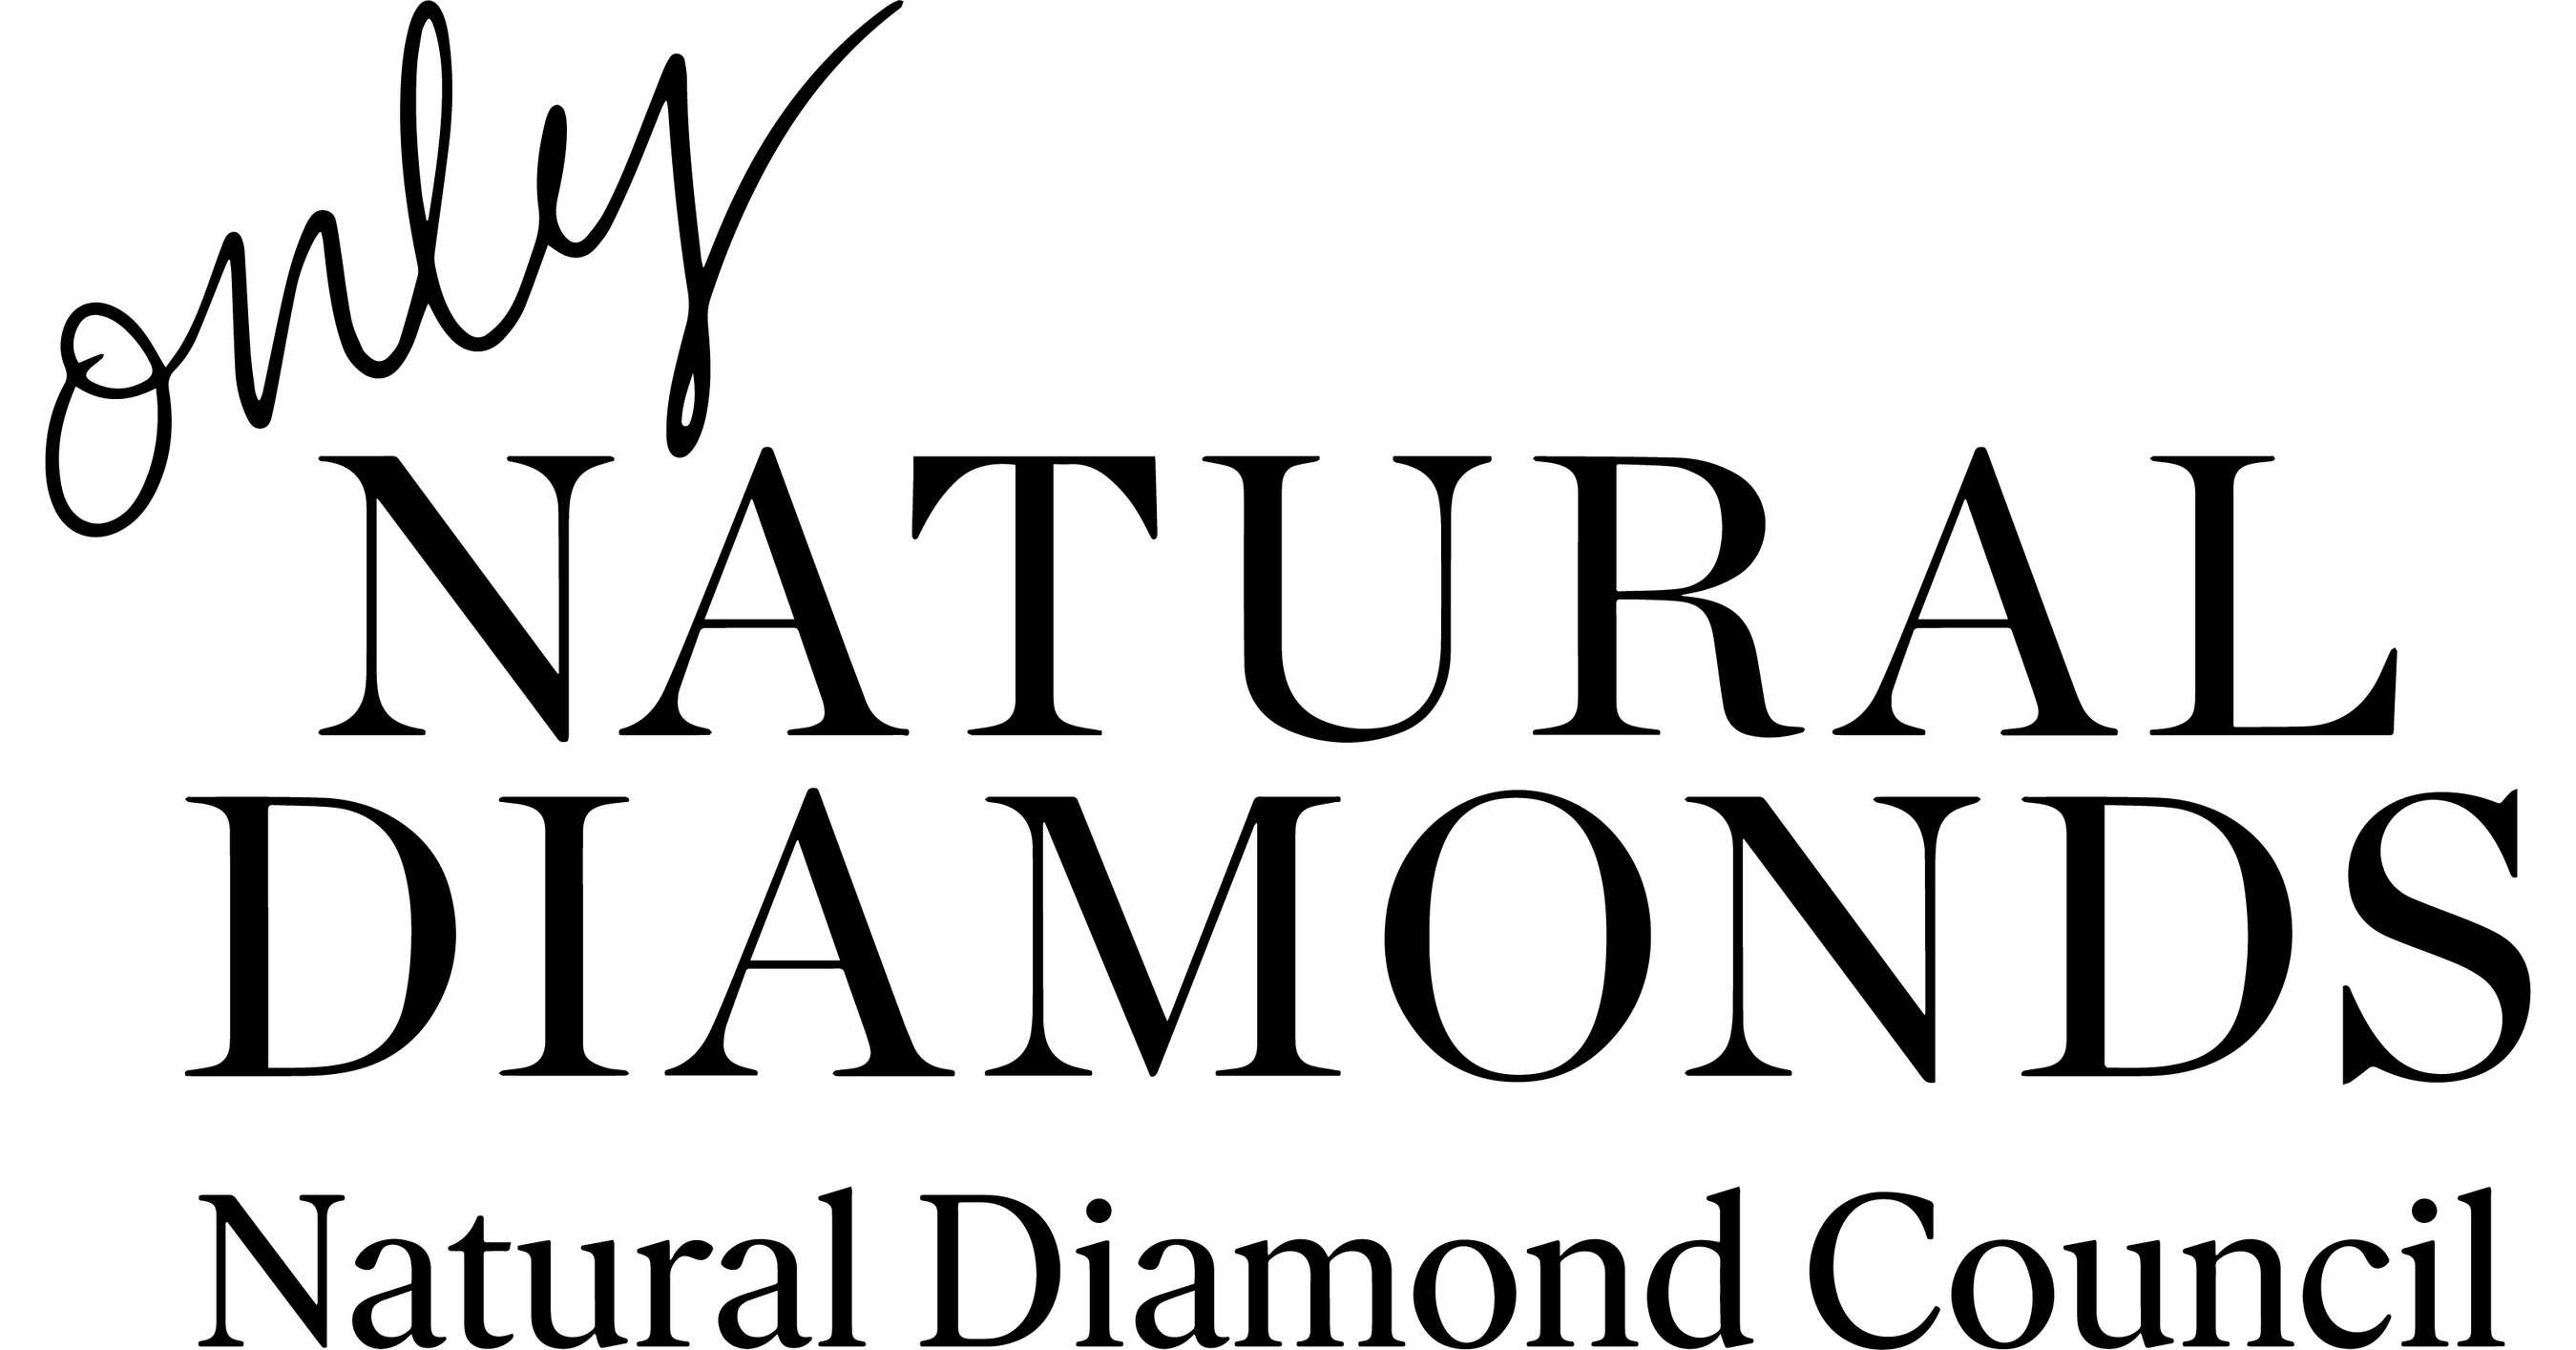 NDC India's jewellery trend report 2022 - Only Natural Diamonds